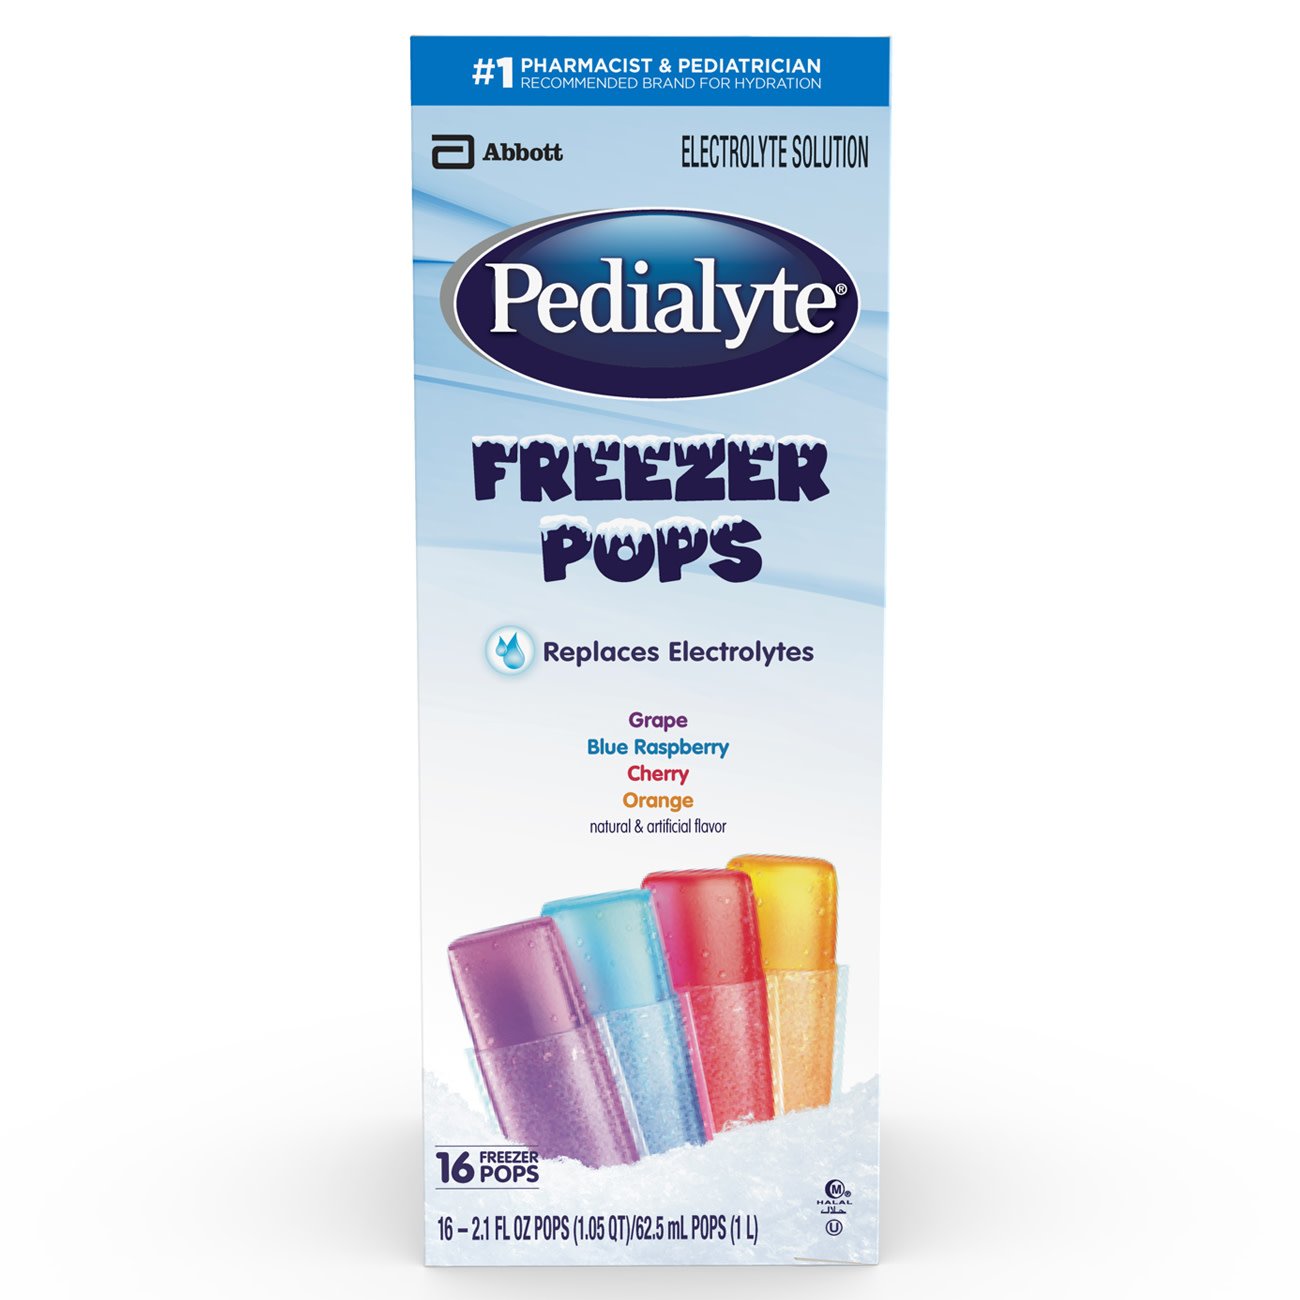 Pedialyte® Freezer Pop Electrolyte Solution, Assorted Flavors